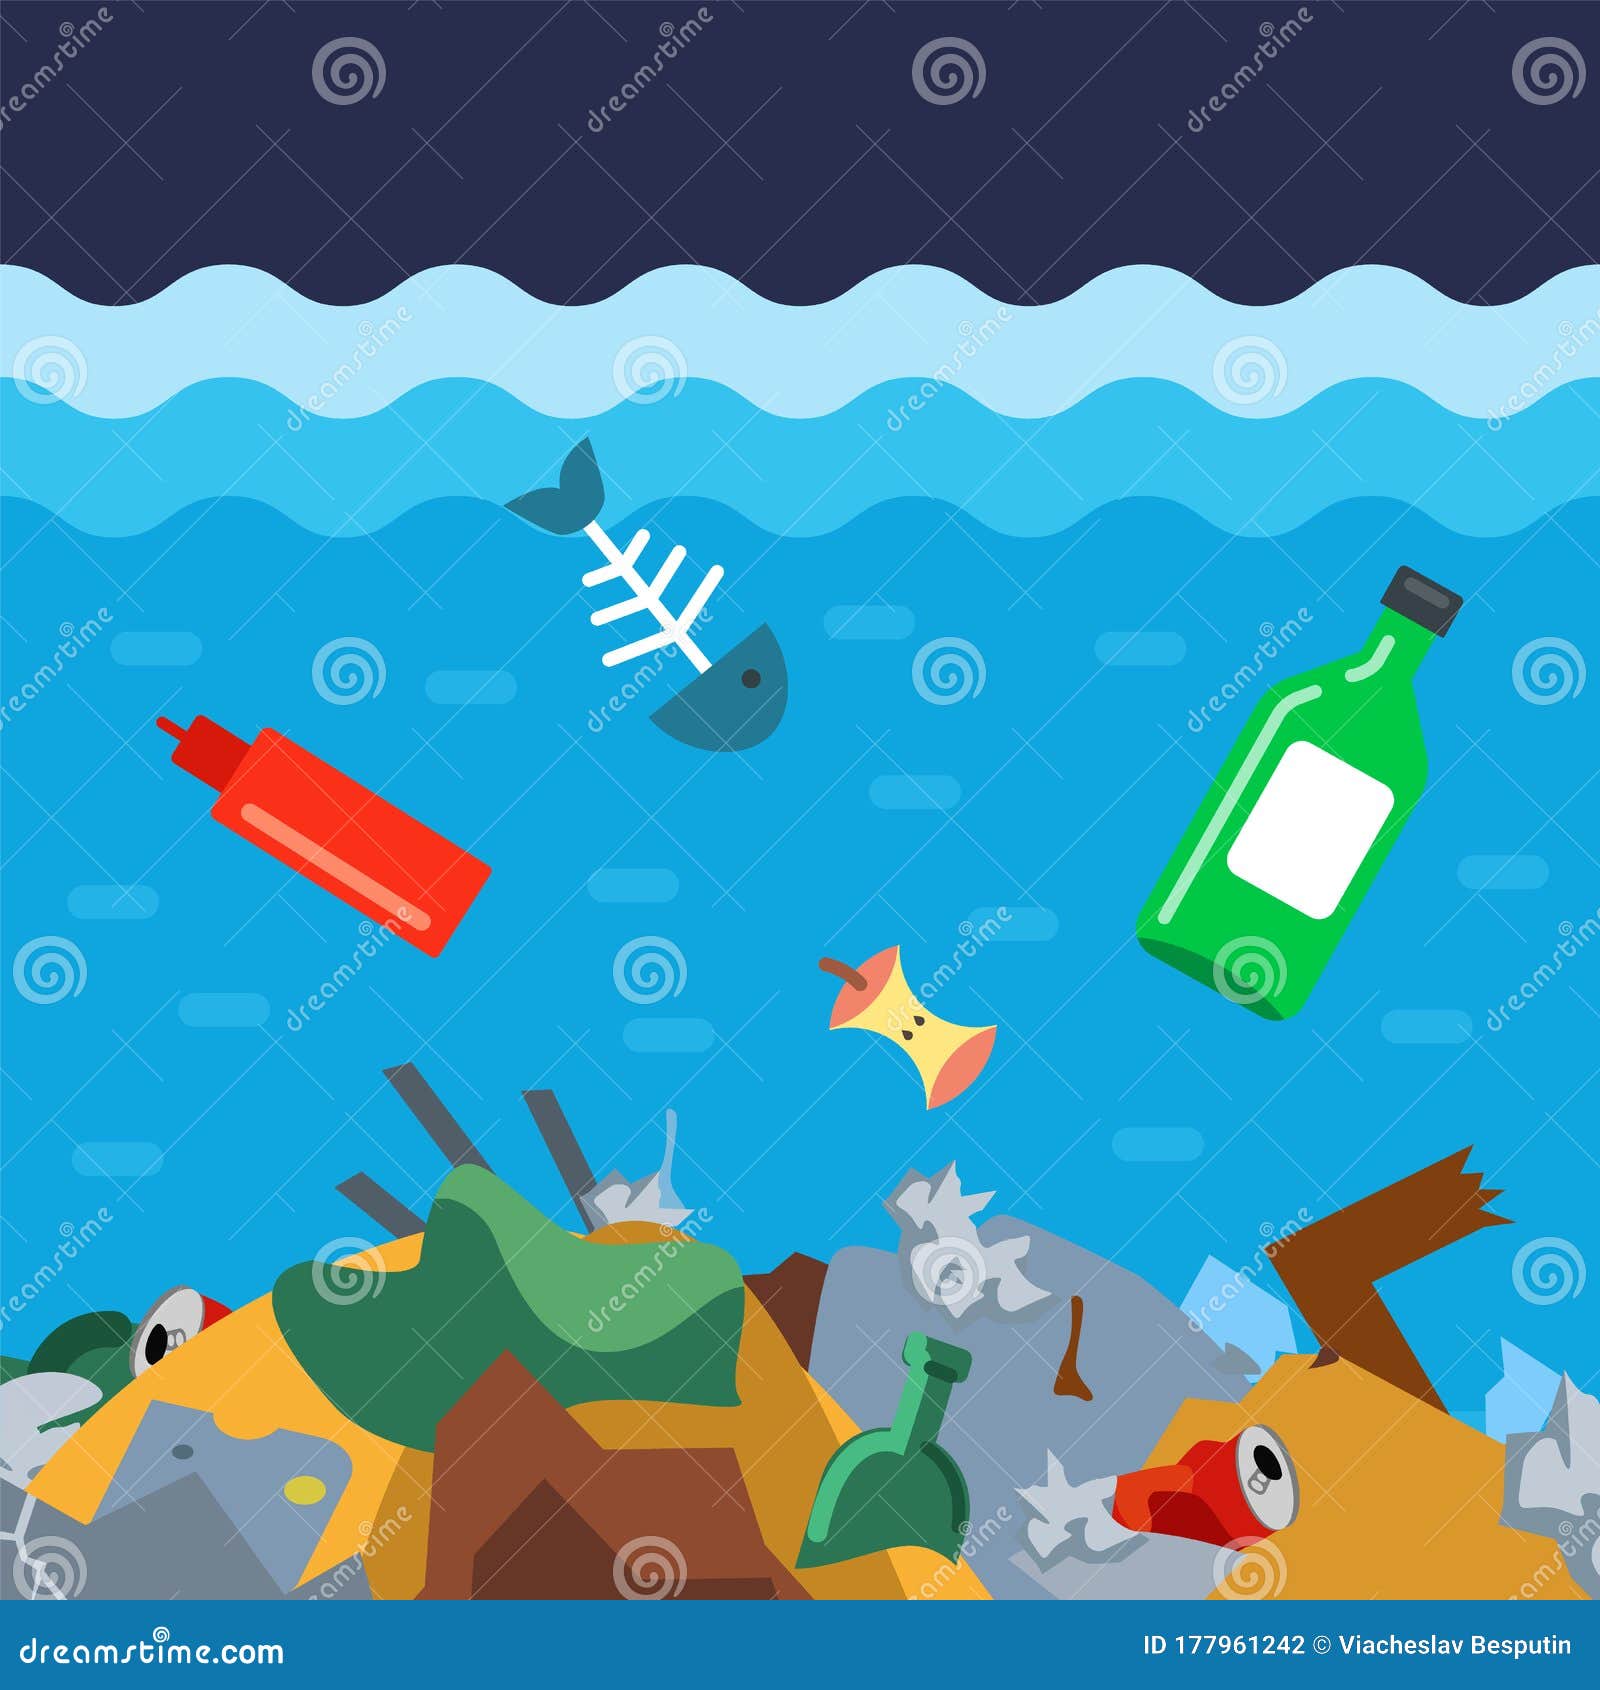 Throw Garbage To the Bottom of the Ocean. Ecological Disaster in the ...